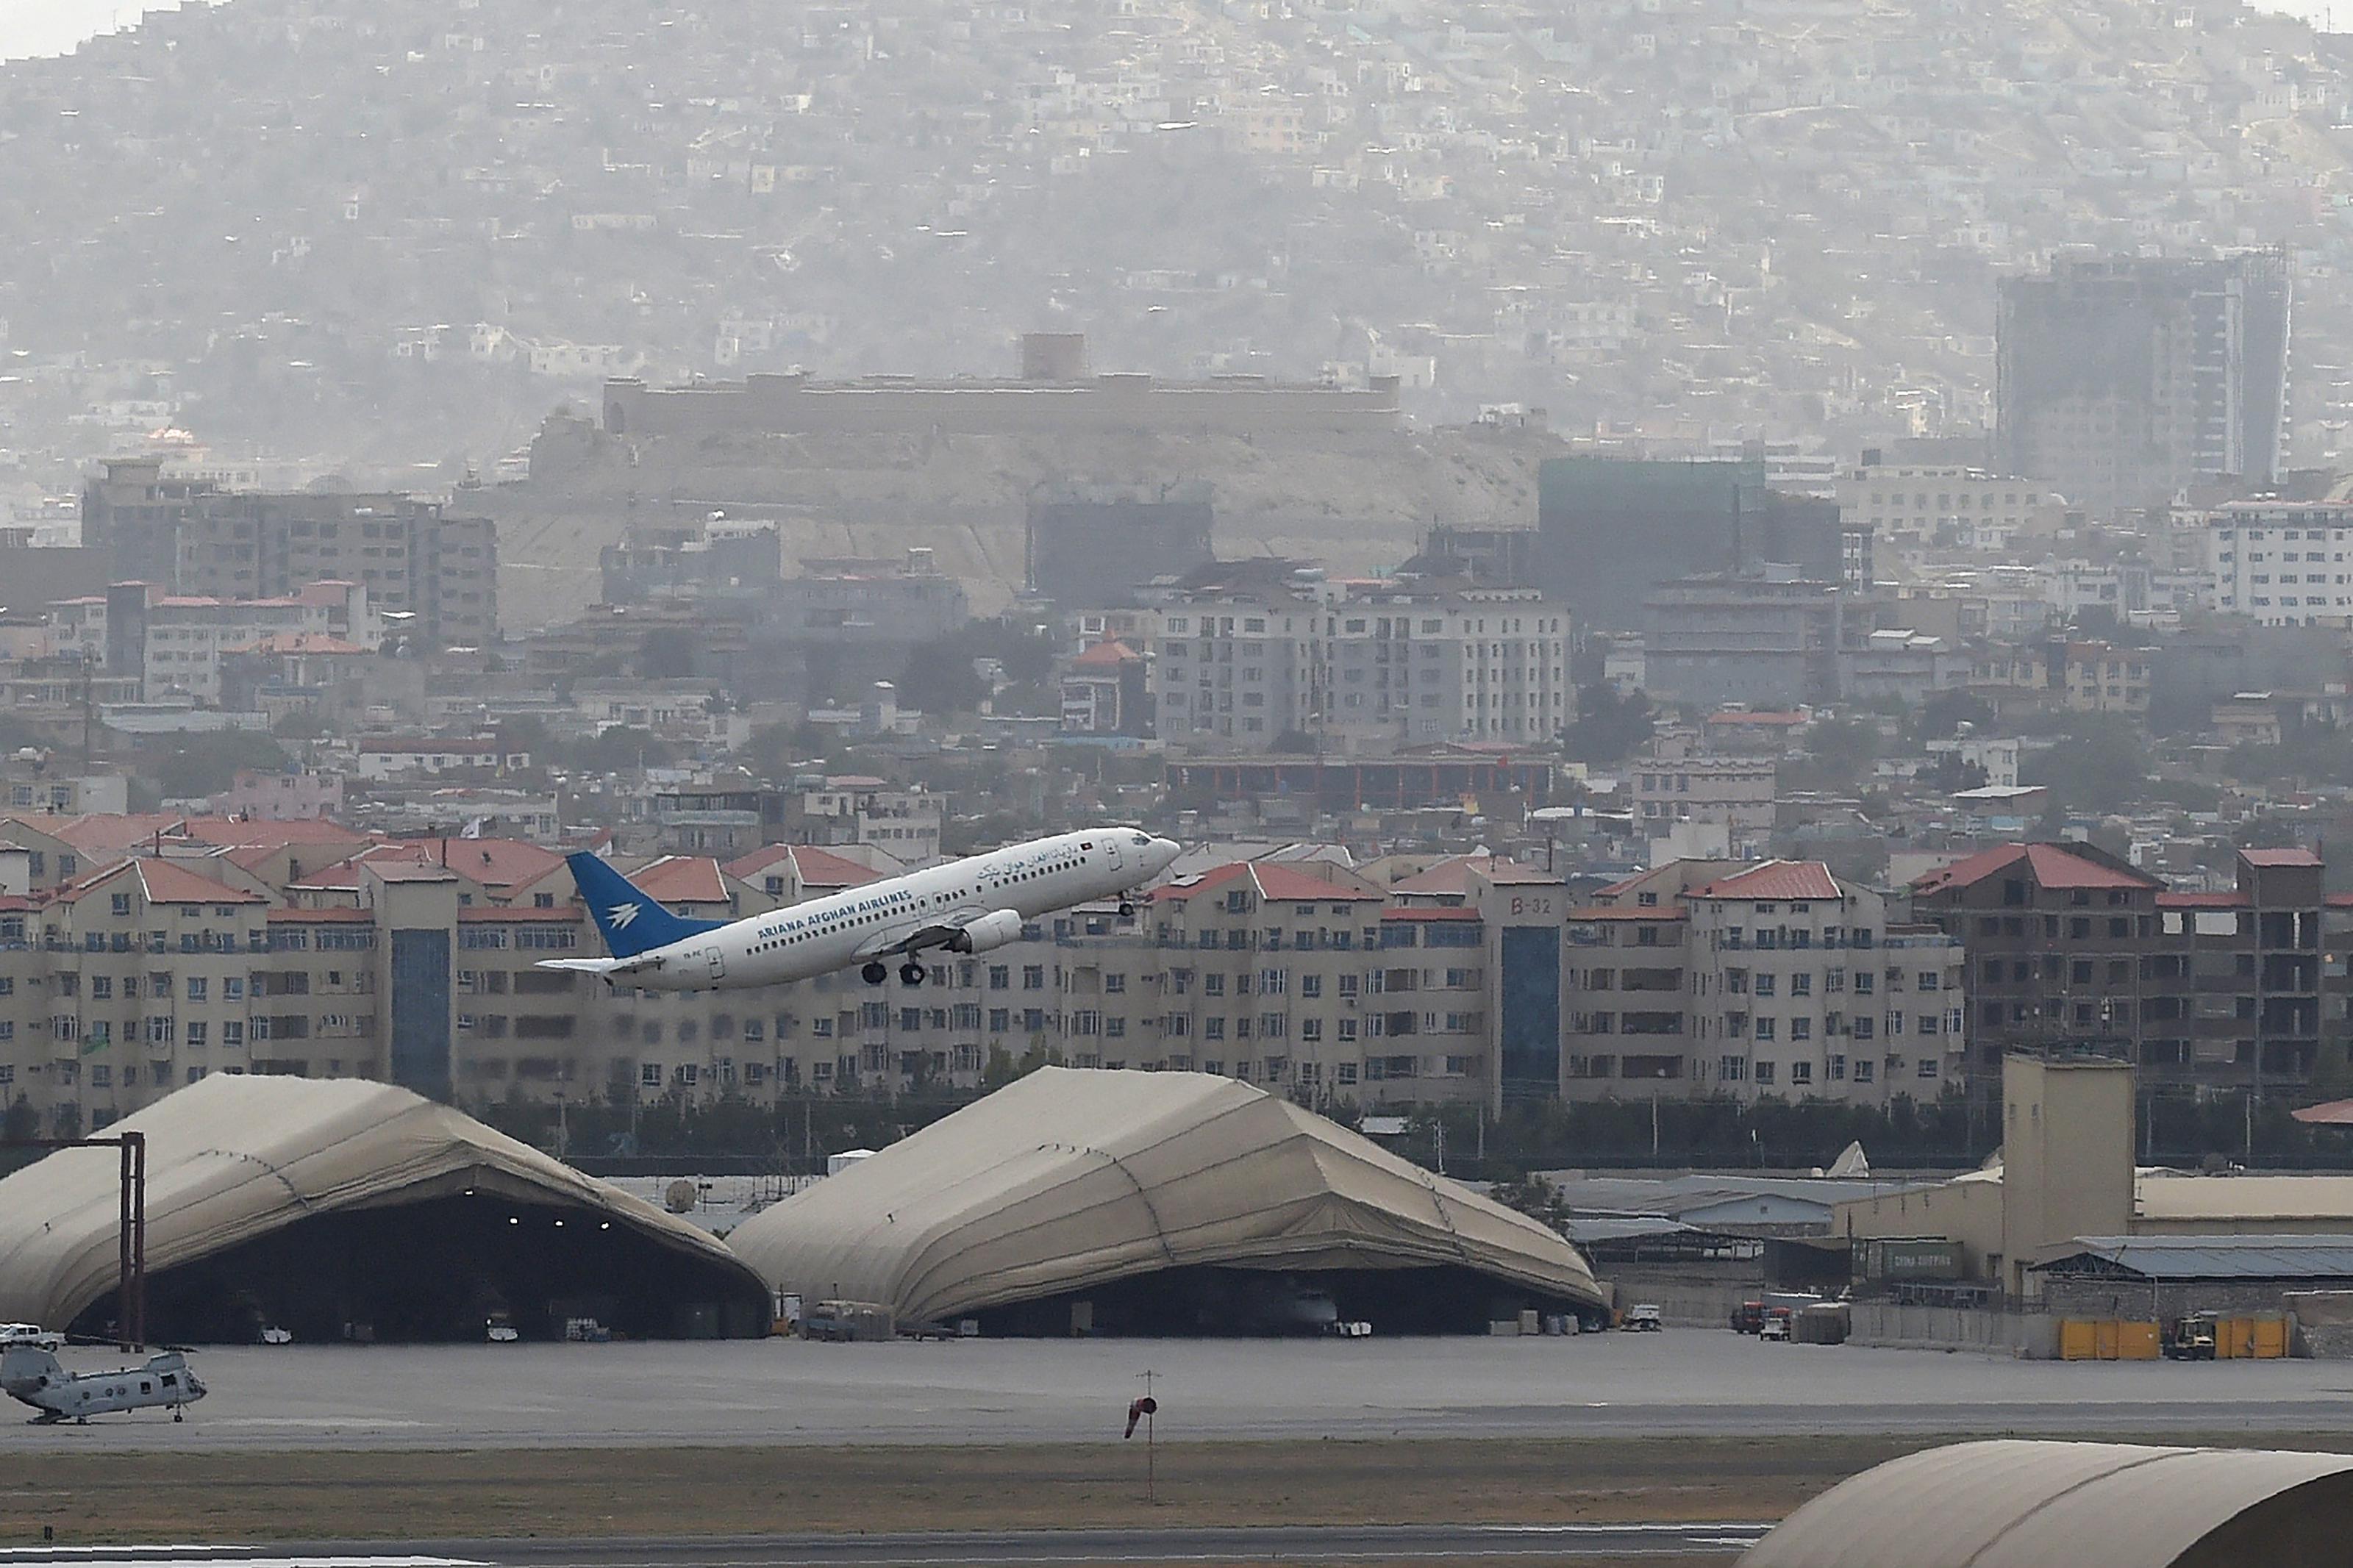 An Ariana Afghan Airlines plane takes off with the city of Kabul in the background